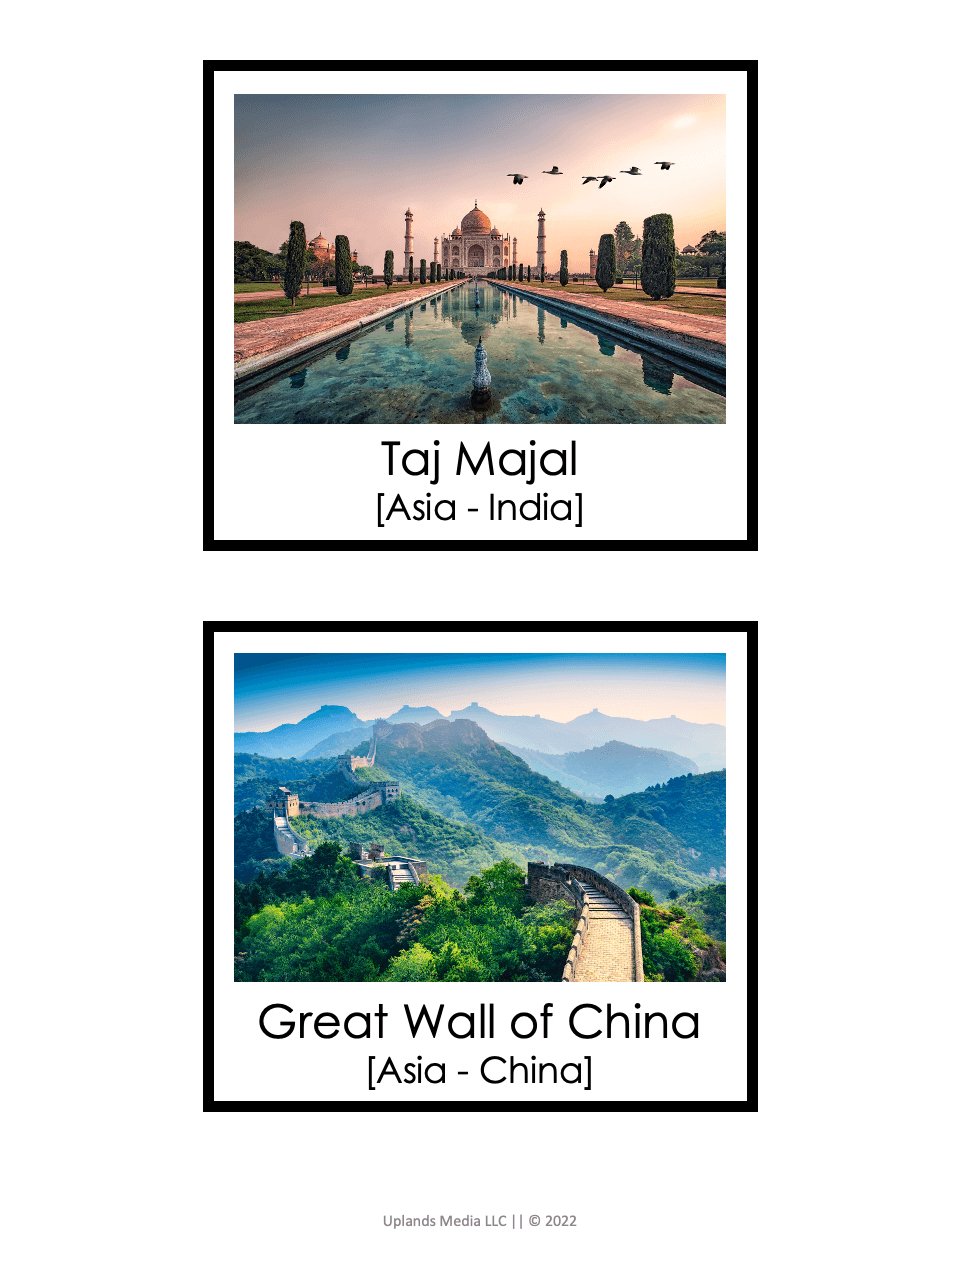 [Geography] 3 Part Cards - World Landmarks - Printables by Carrots Are Orange